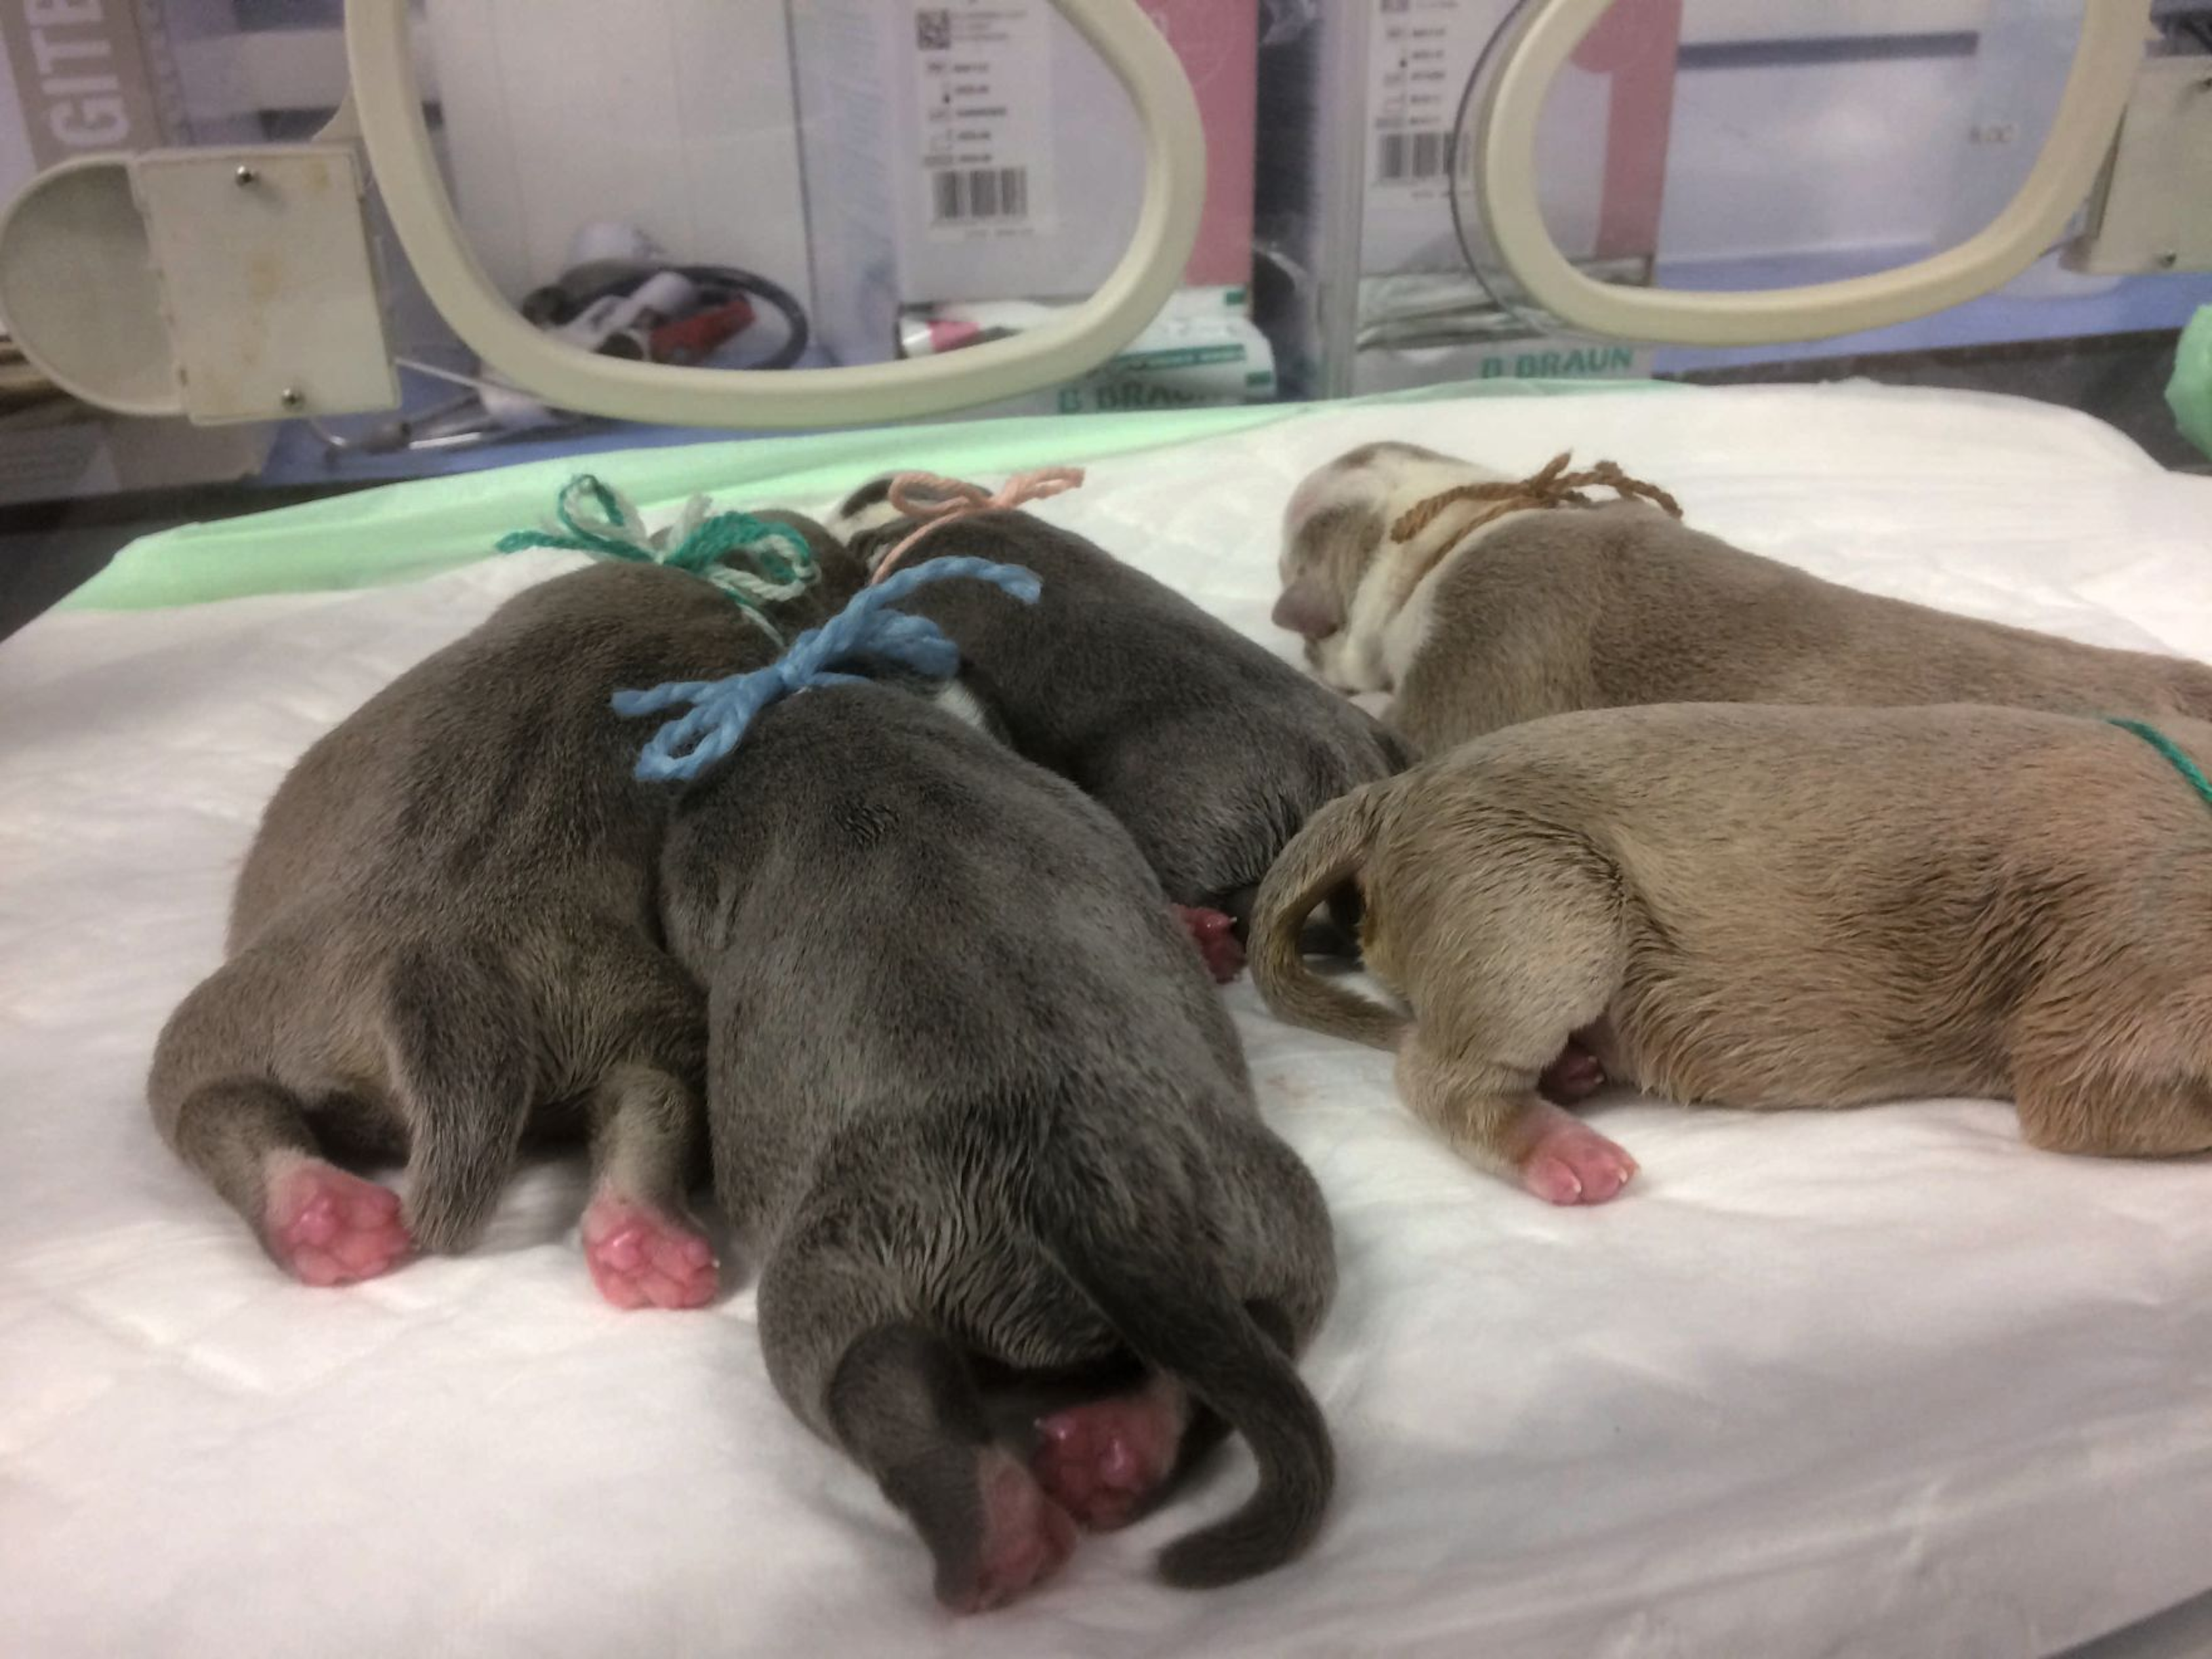 Hospitalized puppies should be kept in a dedicated incubator